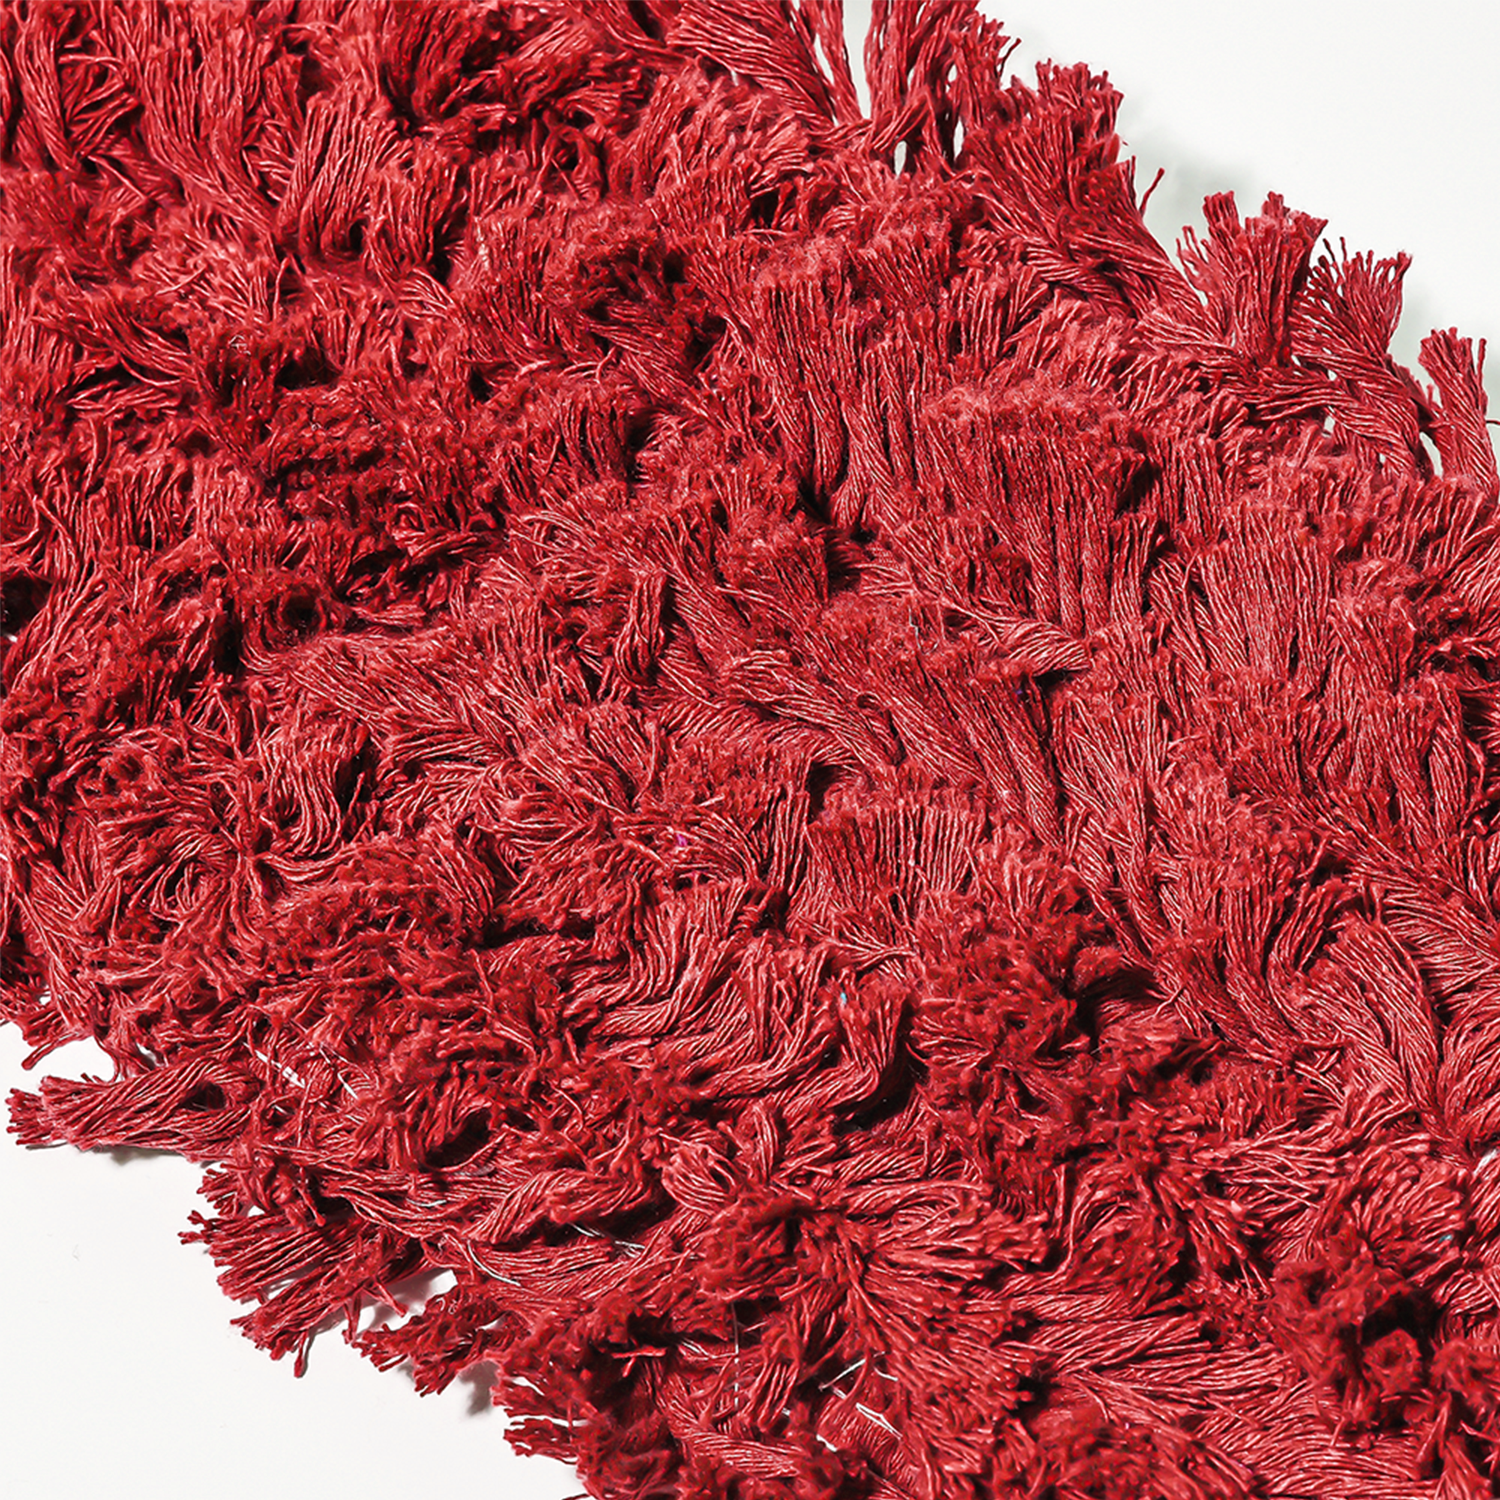 Tidy Tools 48 Inch Dust Mop Refill, Red